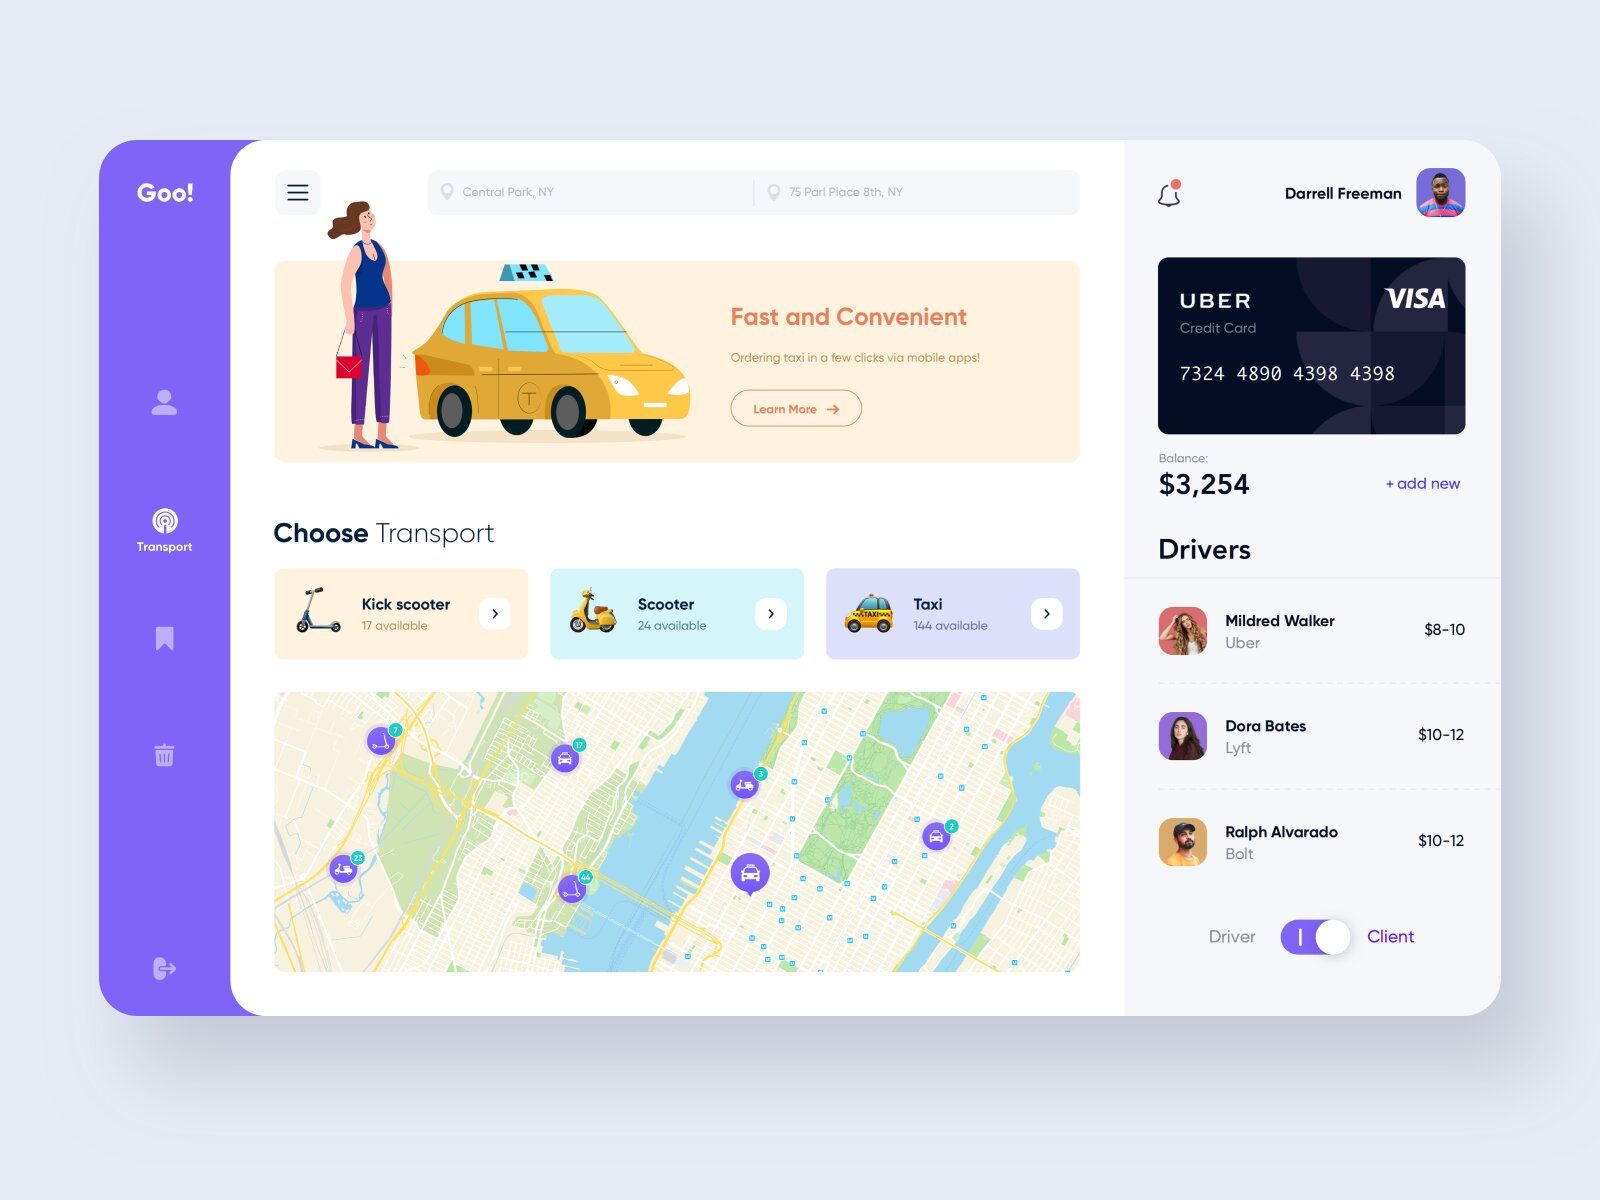 To create an online marketplace you should look at marketplaces like Aliespress, Upwork, Etsy, and see what they offer (*image by [Afterglow](https://dribbble.com/Afterglow-studio){ rel="nofollow" target="_blank" .default-md}*)